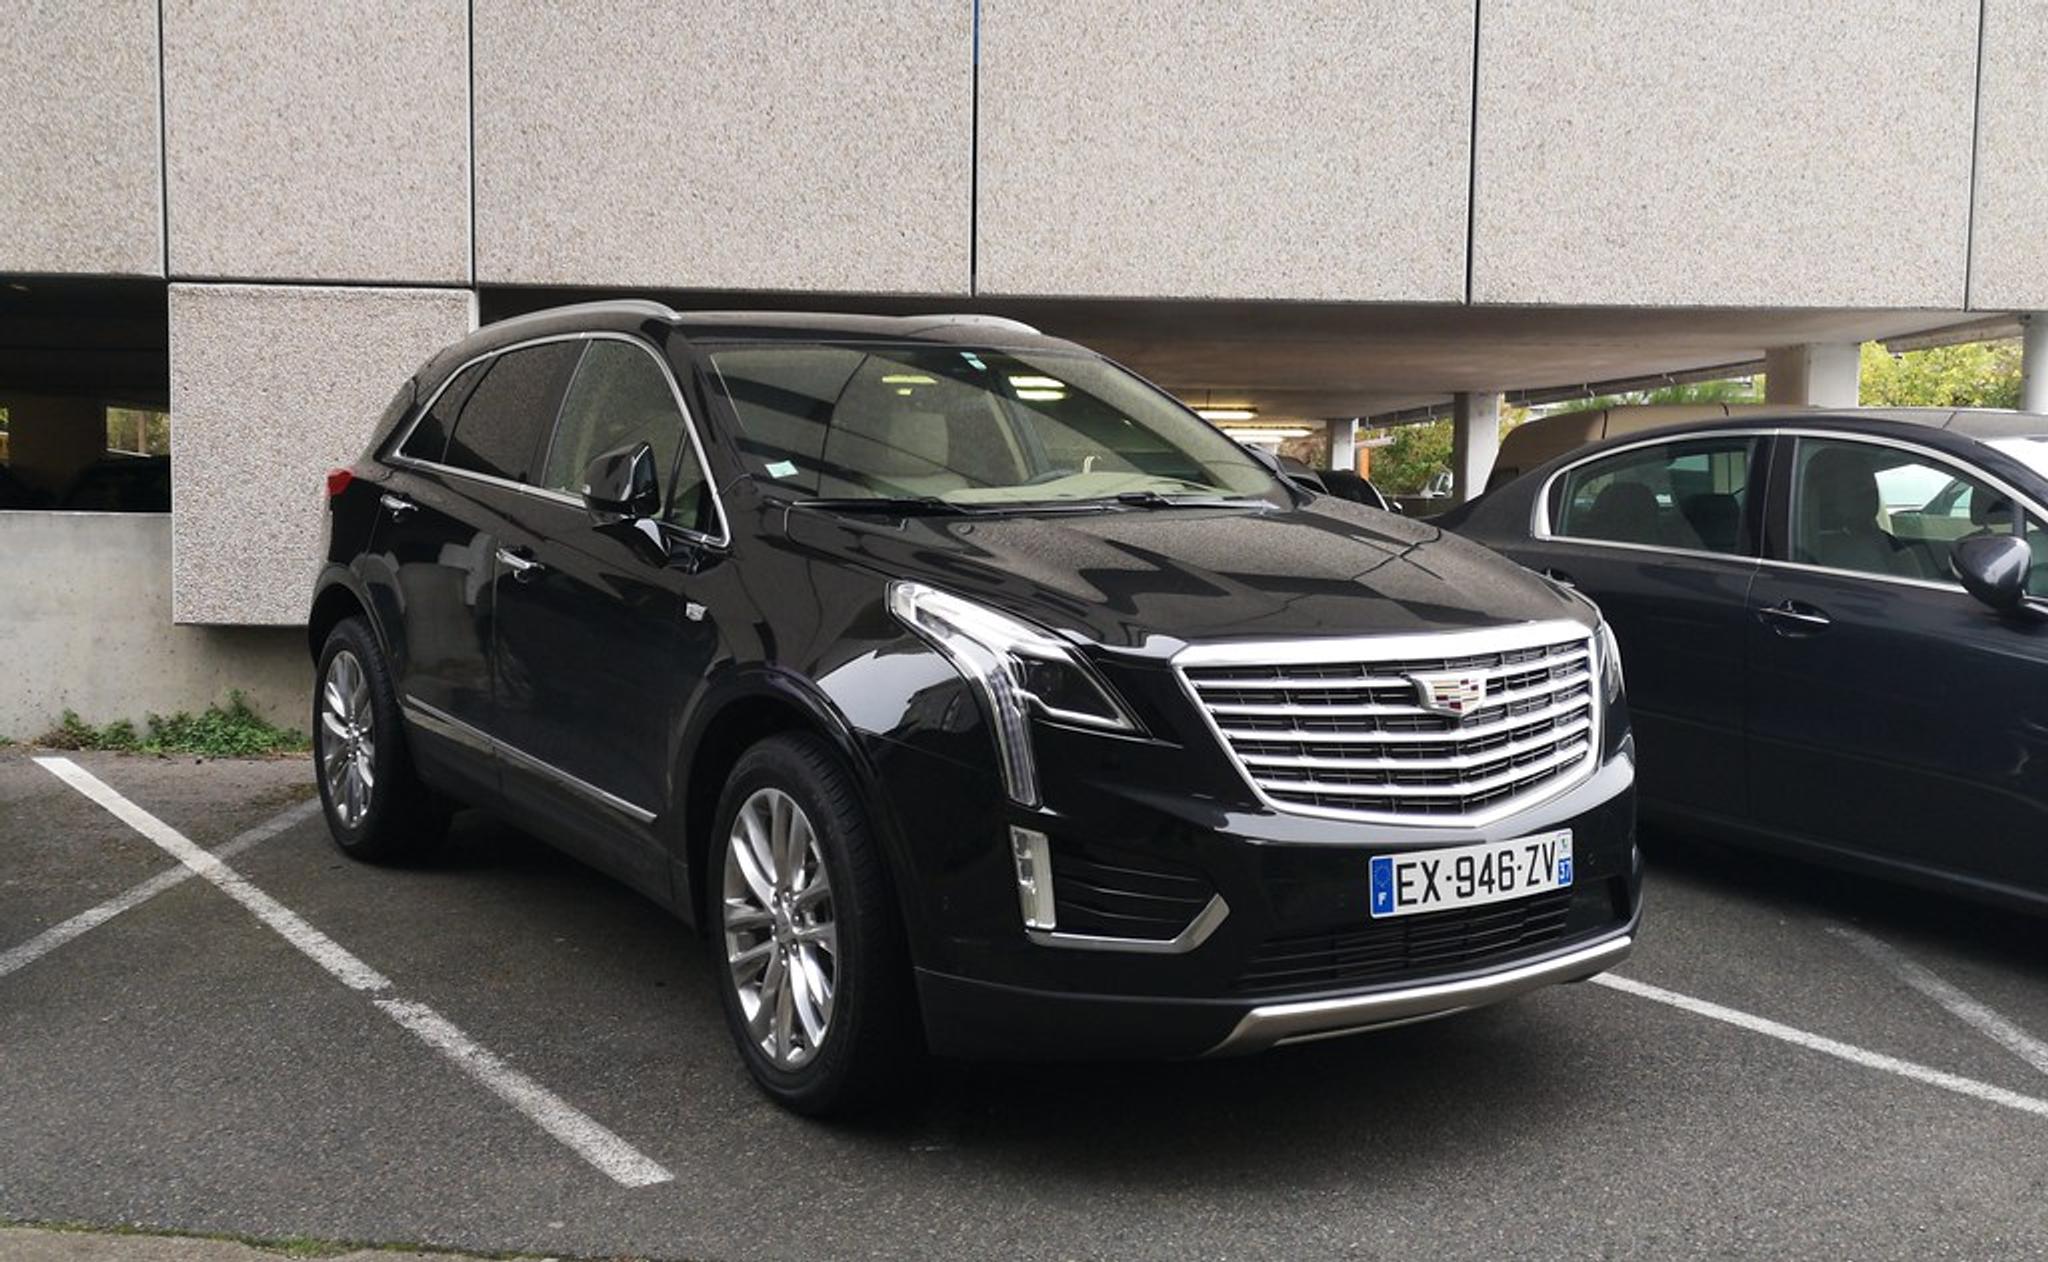 Black Cadillac XT5 in a parking lot